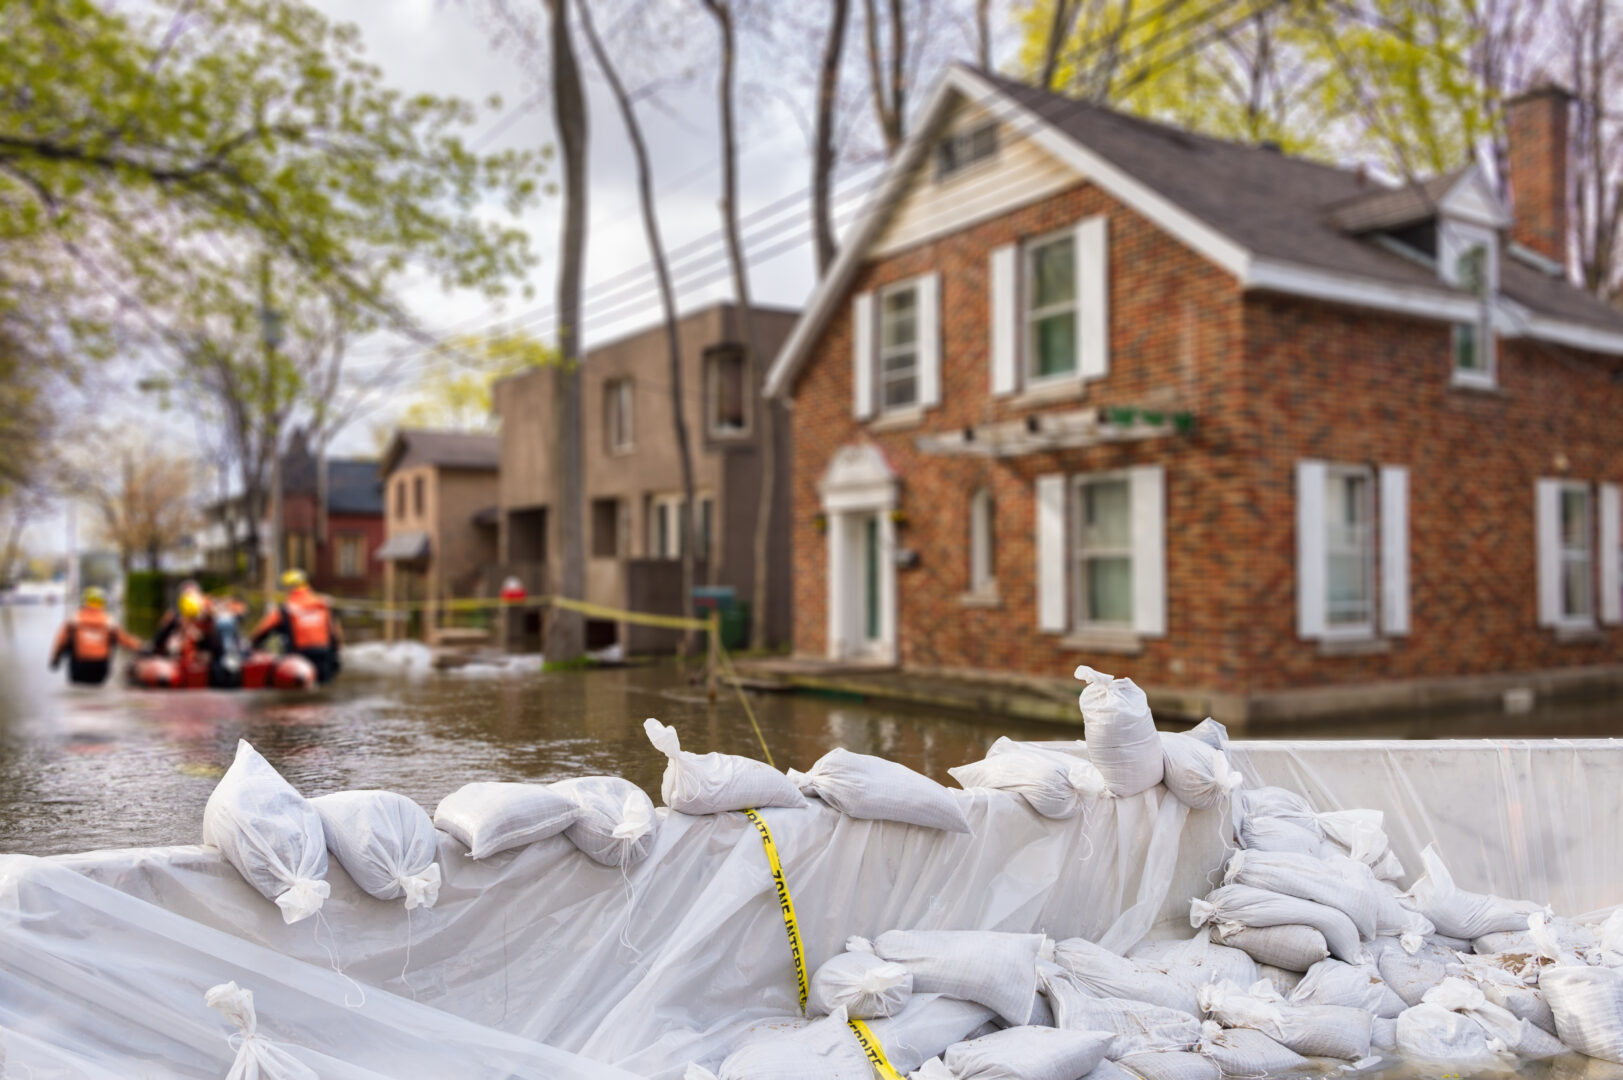 will canadians lose their property insurance because of climate change?